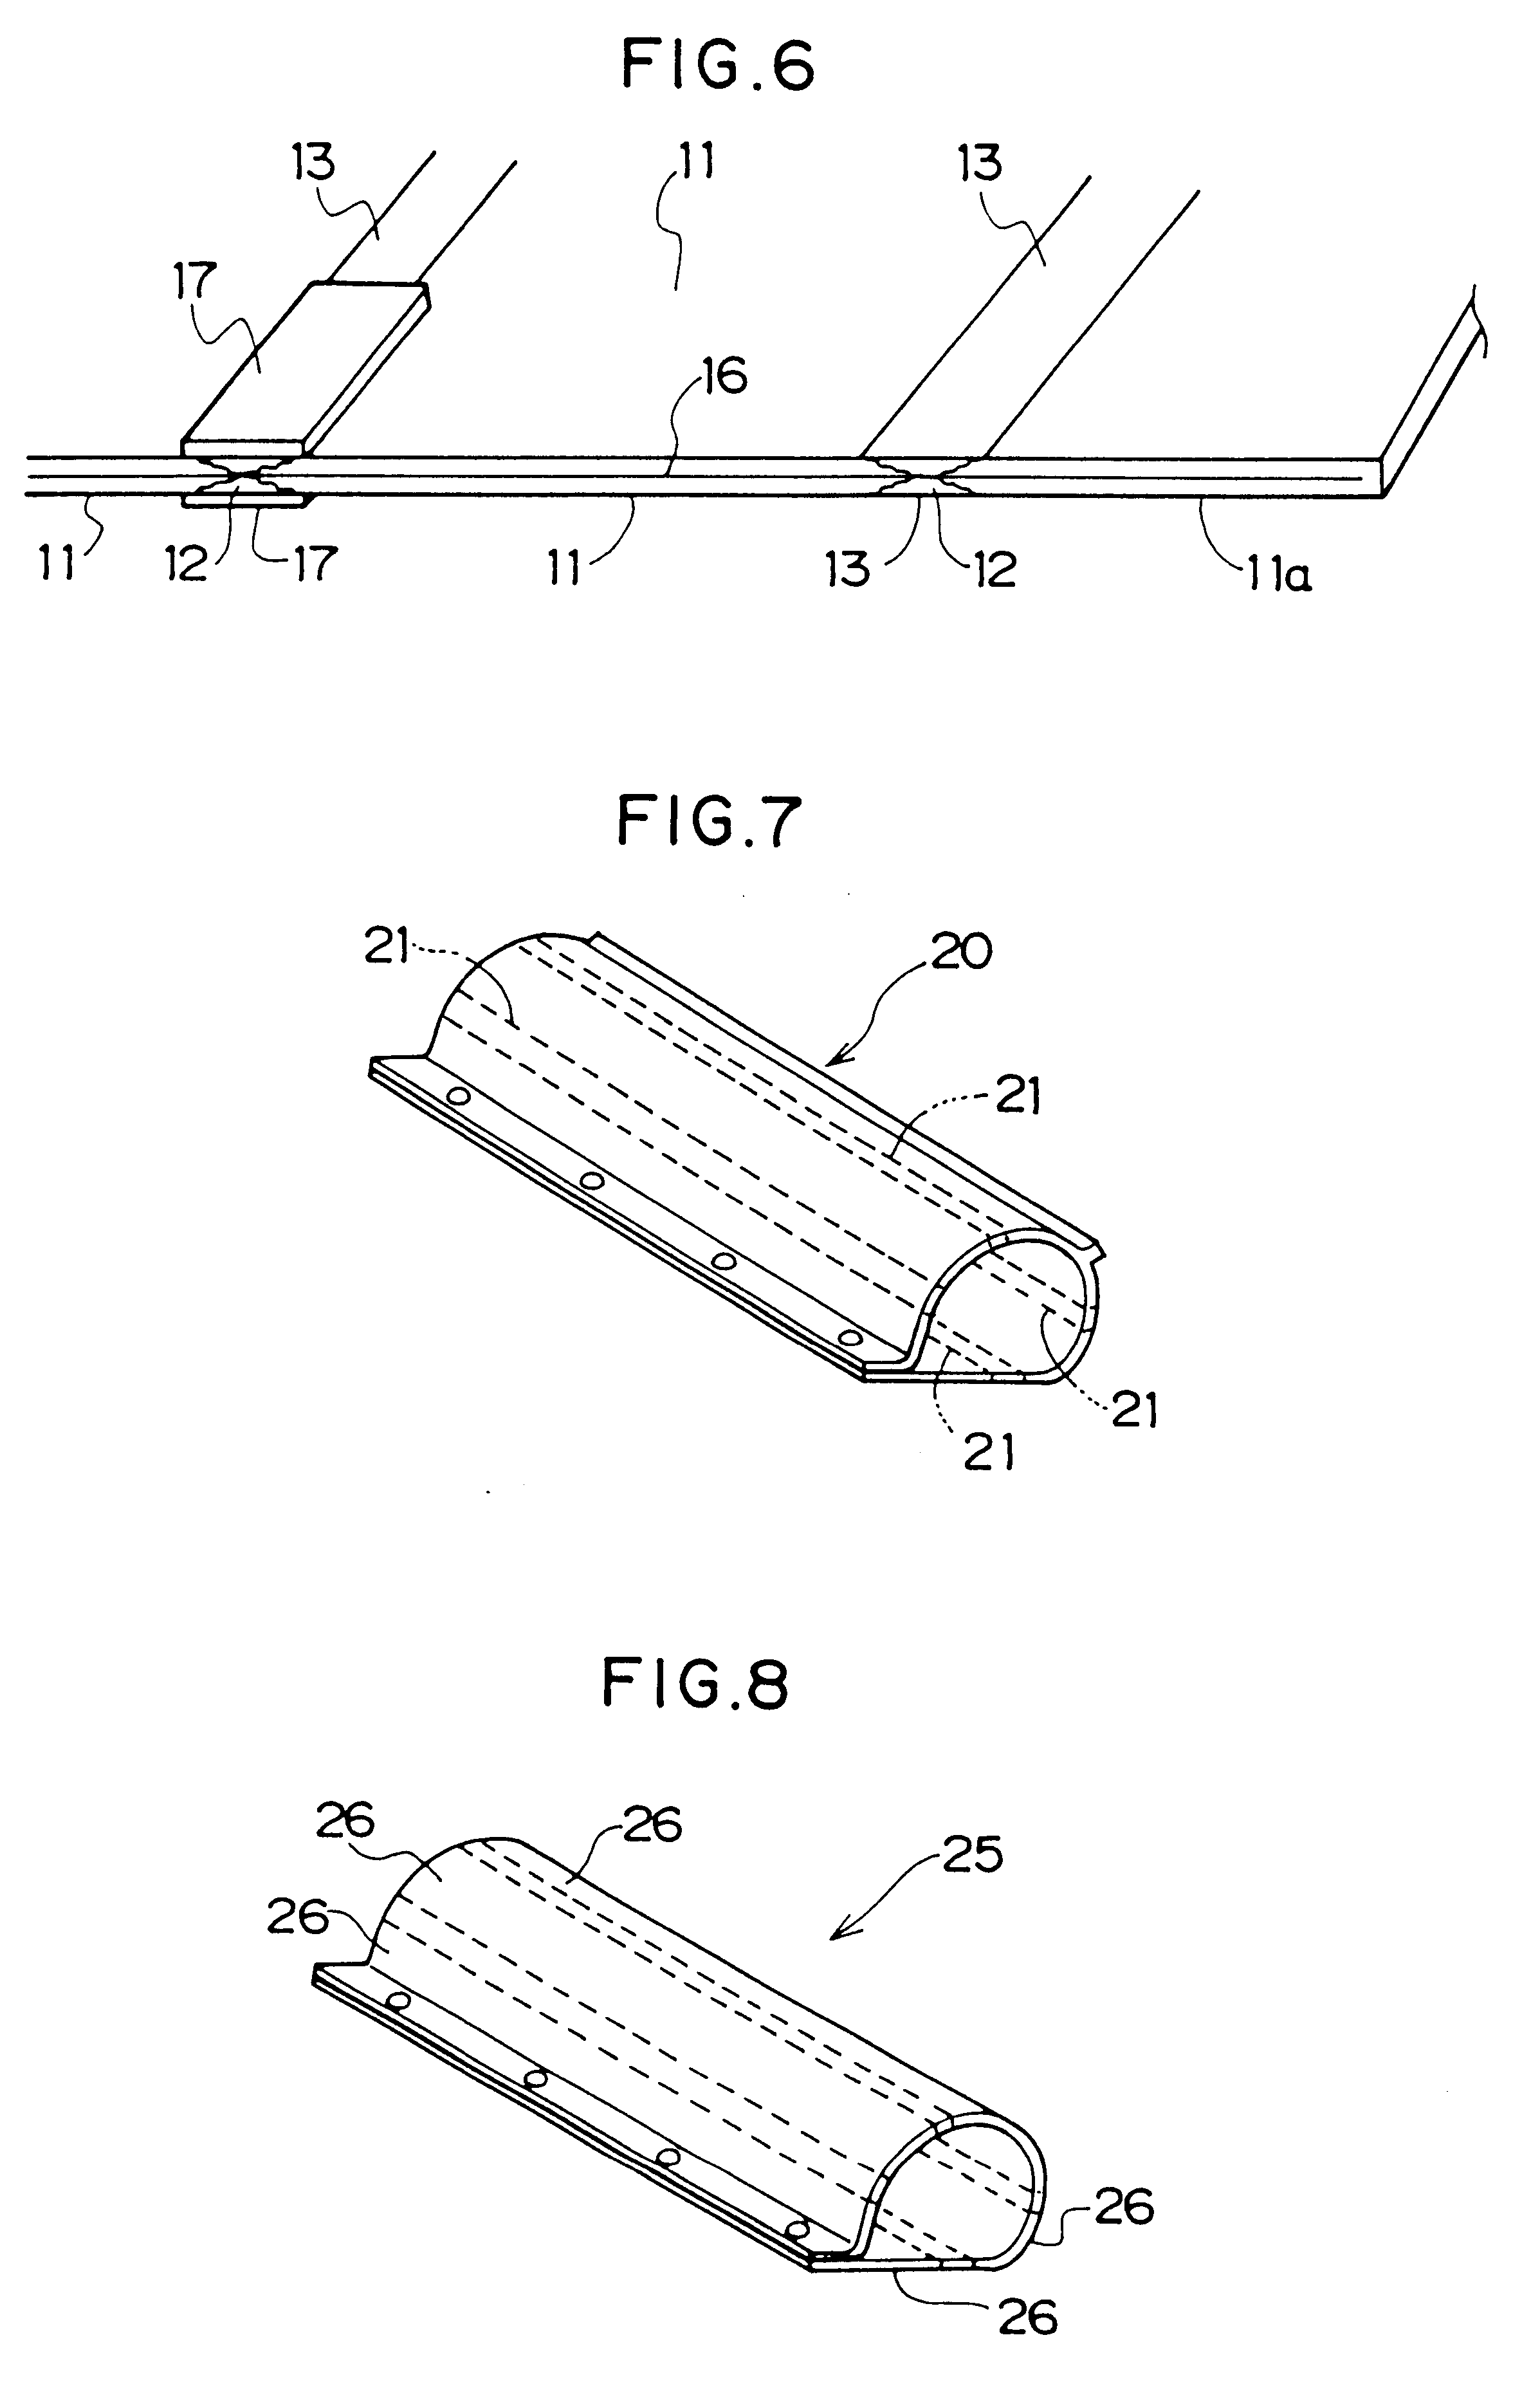 Process for adhering vulcanized rubbers and process for producing rubber products using said process for adhering